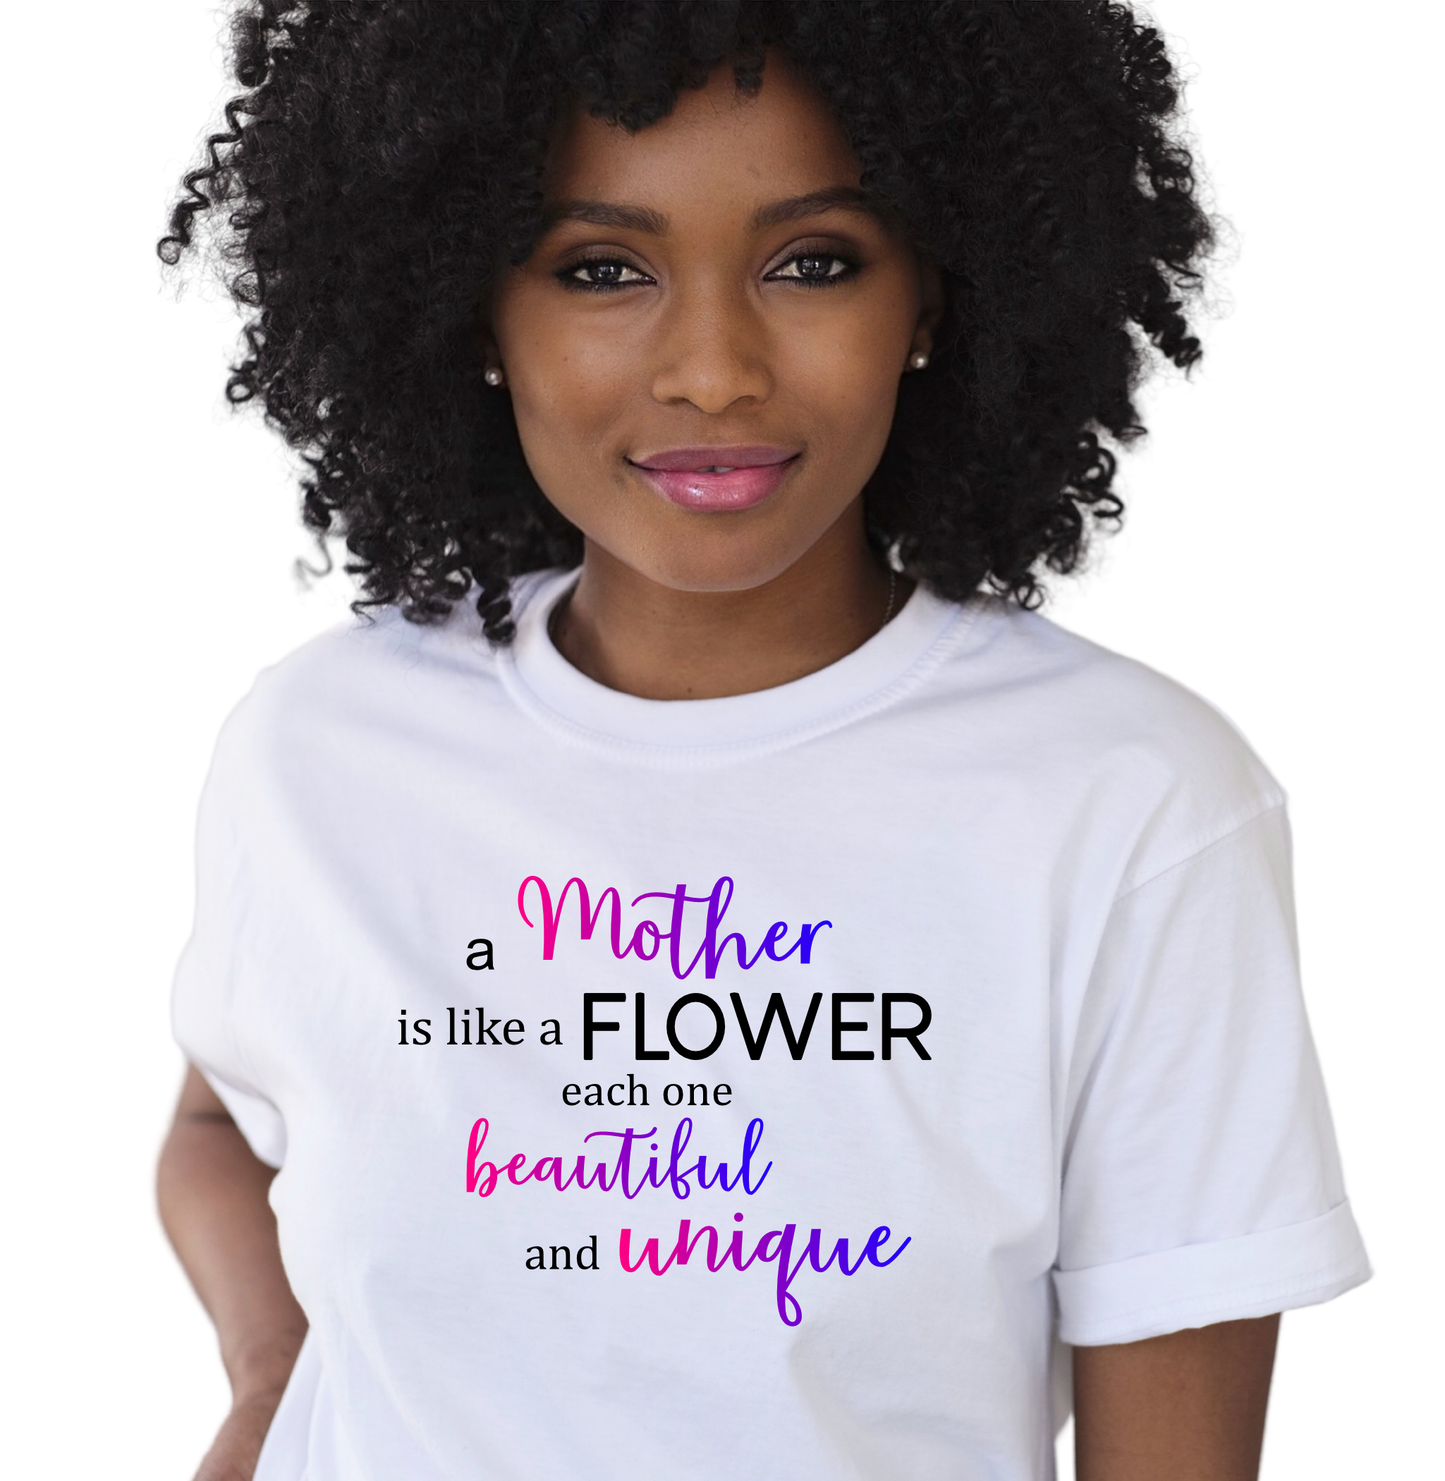 A Mother is Like a Flower T-Shirt